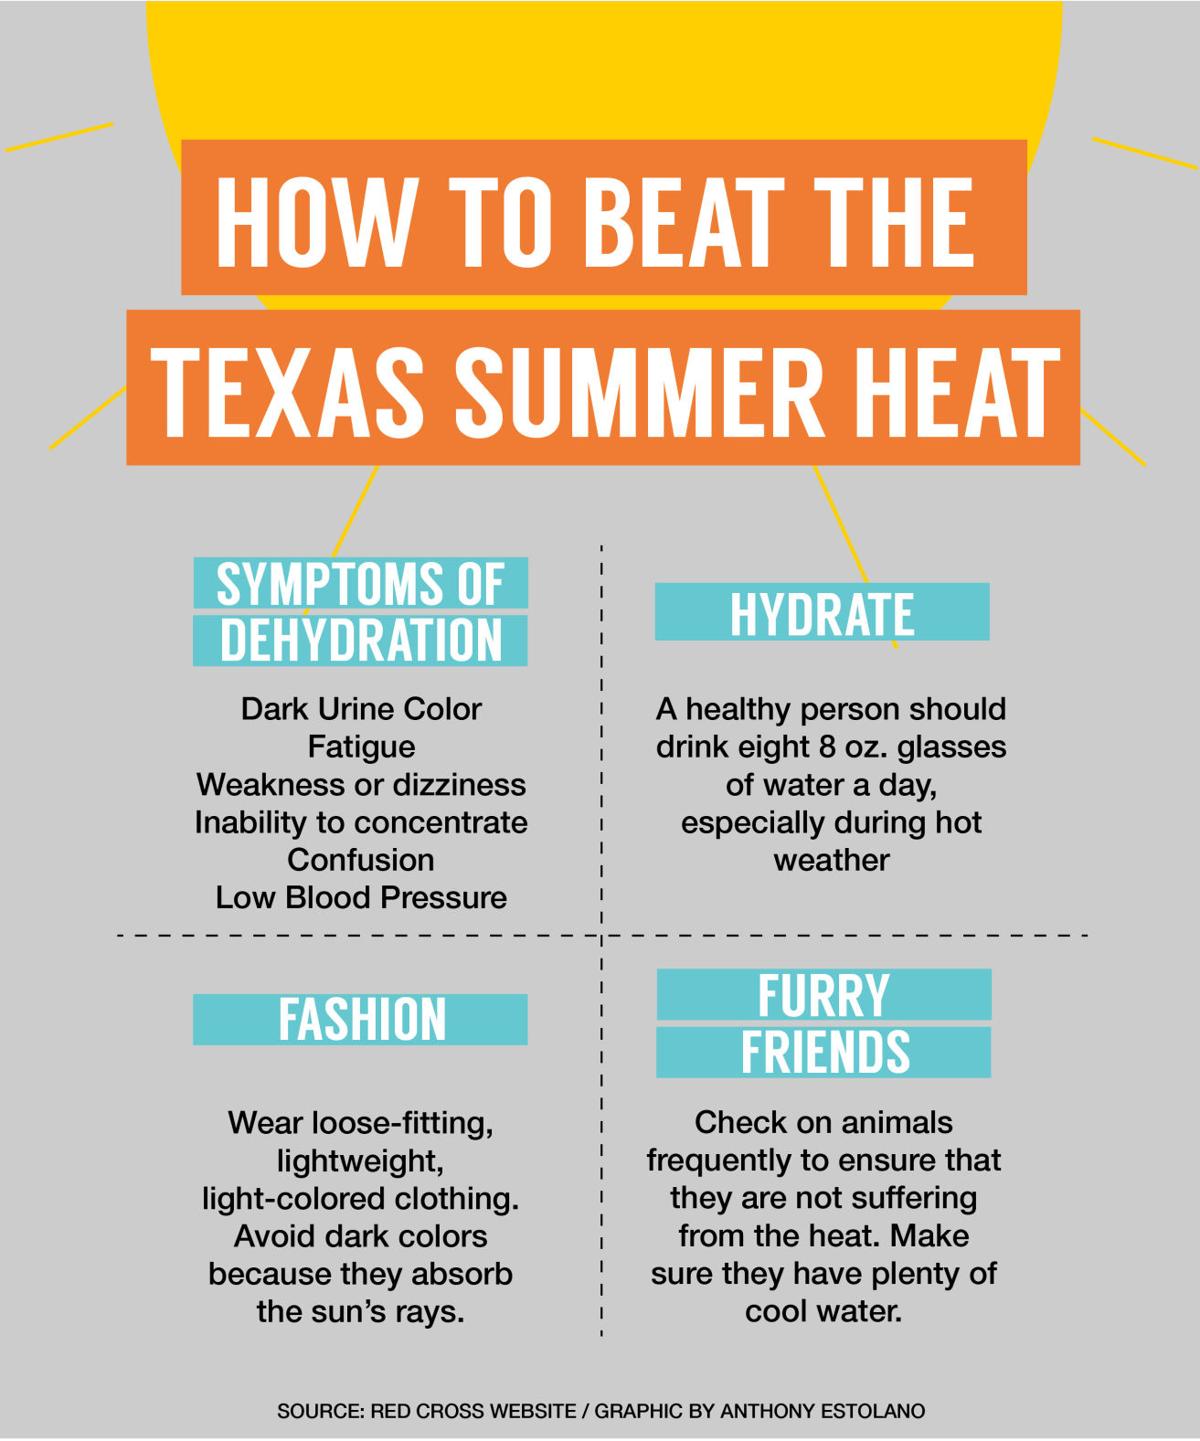 Department of Public Safety Urges Texans to Take Safety Precautions This Summer